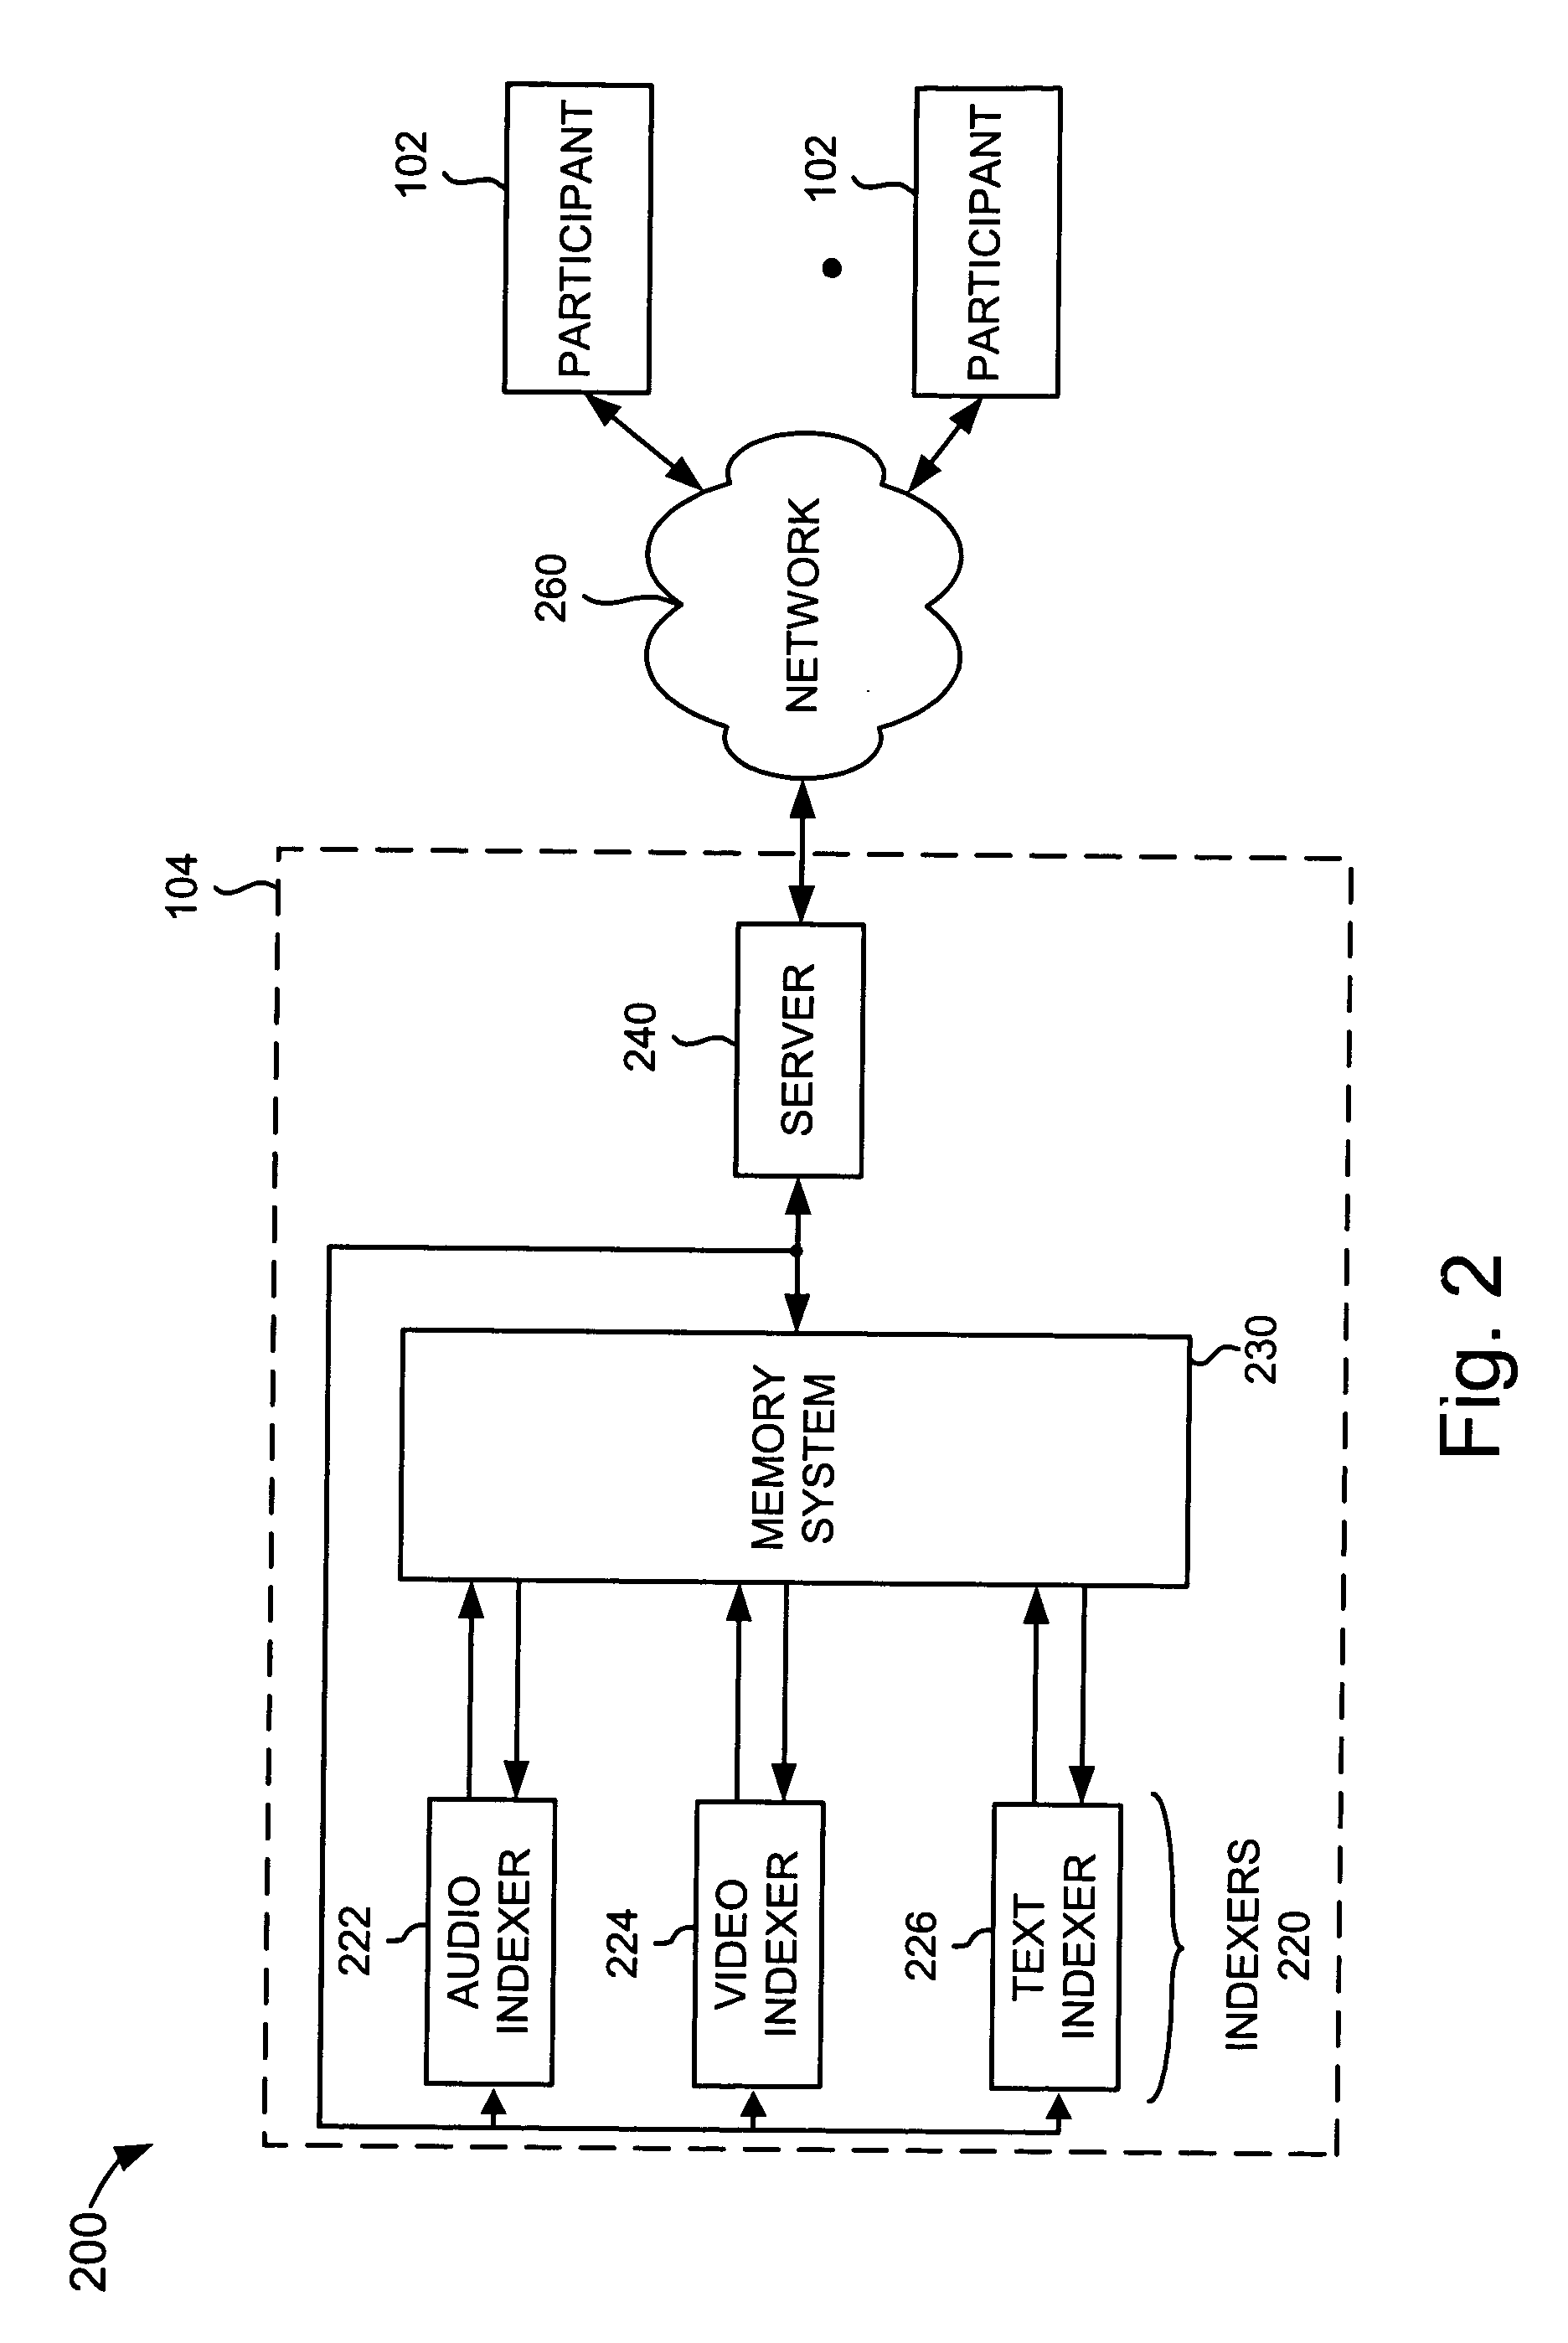 Speech recognition system for managing telemeetings